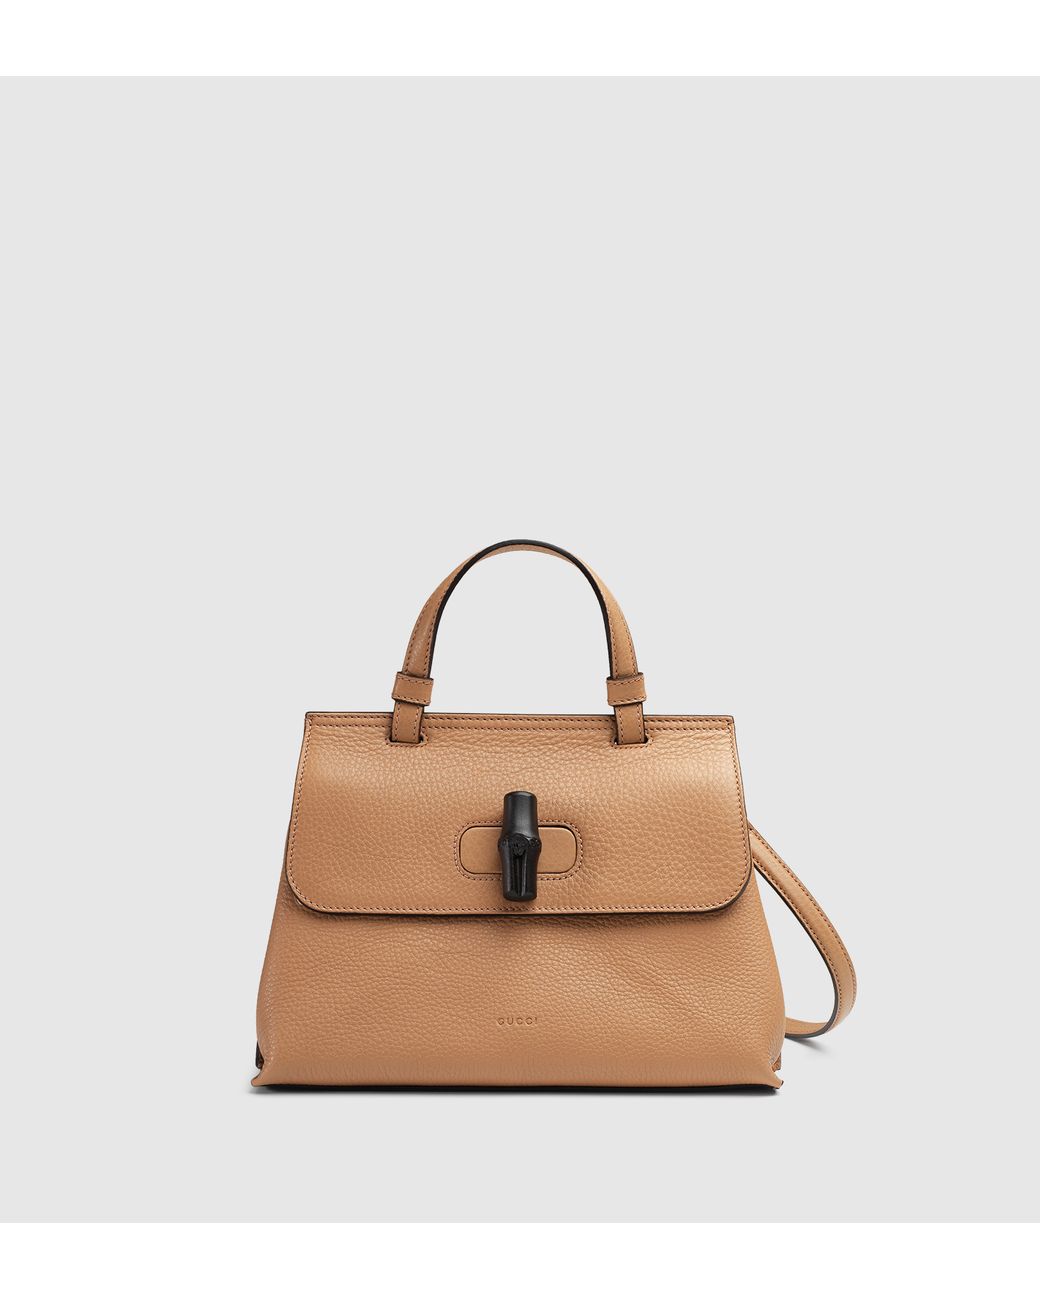 Gucci Bamboo Daily Leather Top Handle Bag in Natural | Lyst